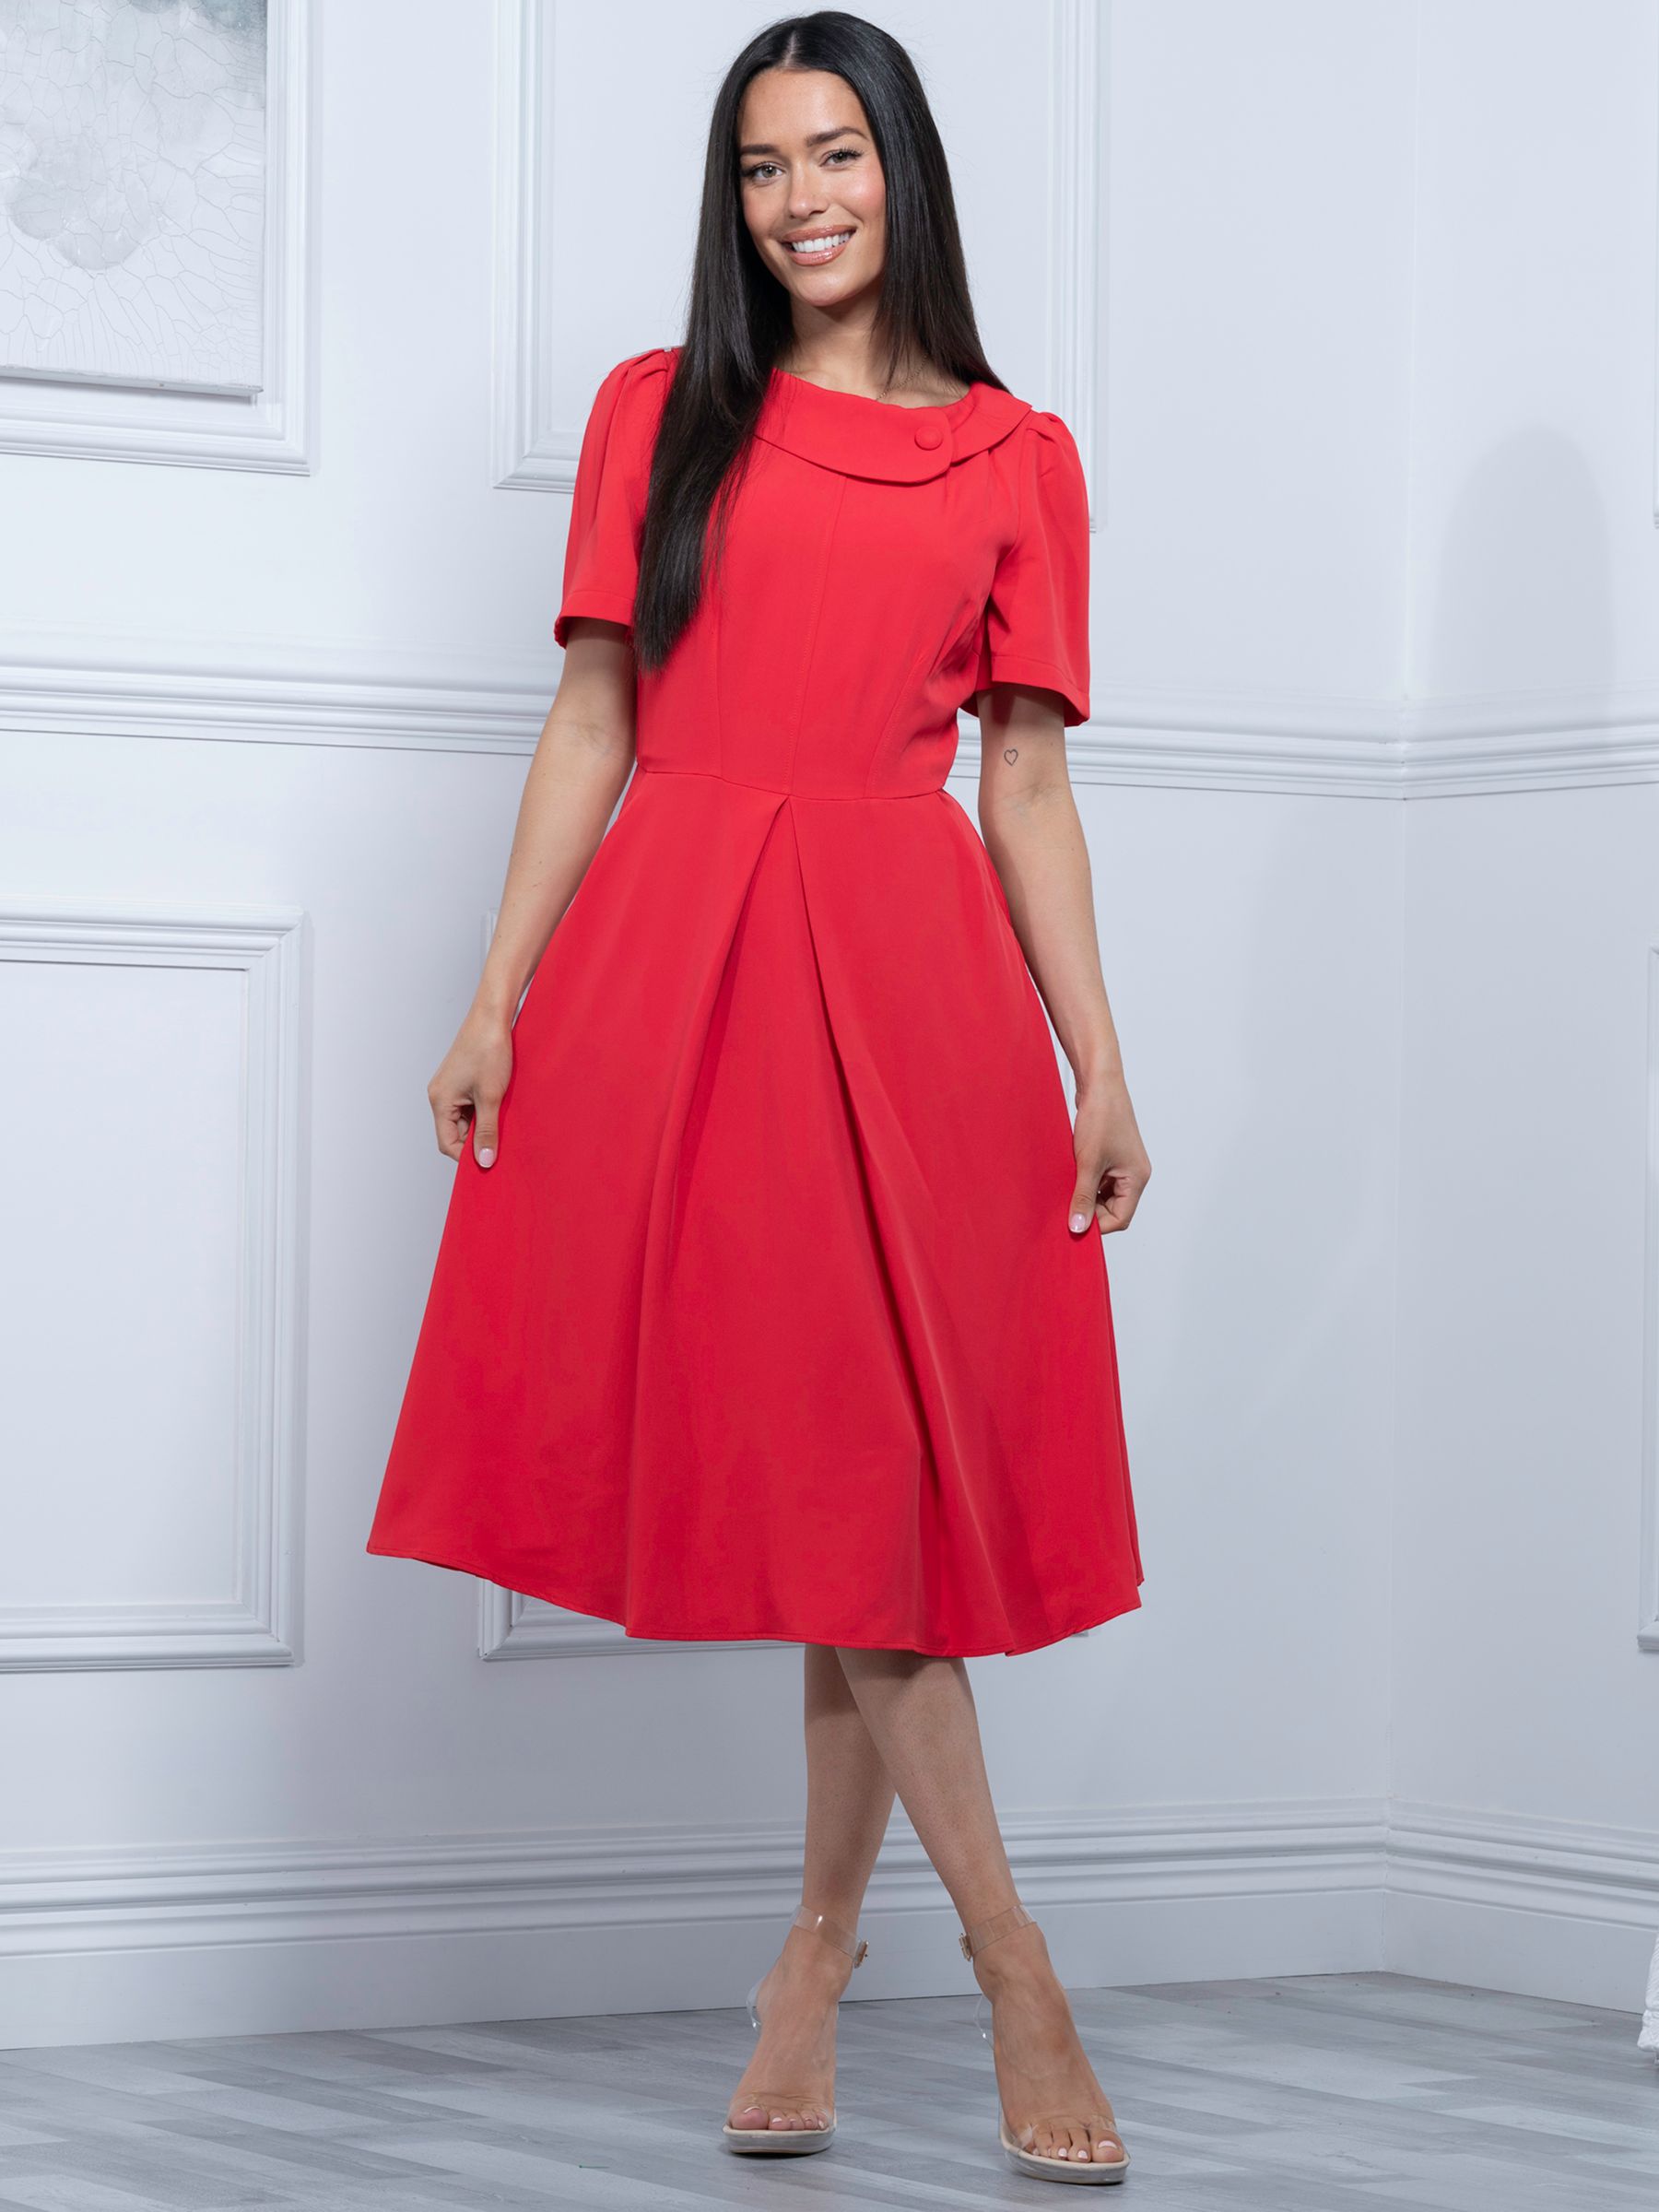 Ralph Lauren Women's 3/4 Sleeve Above The Knee Fit + Flare Party Dress Red  Size